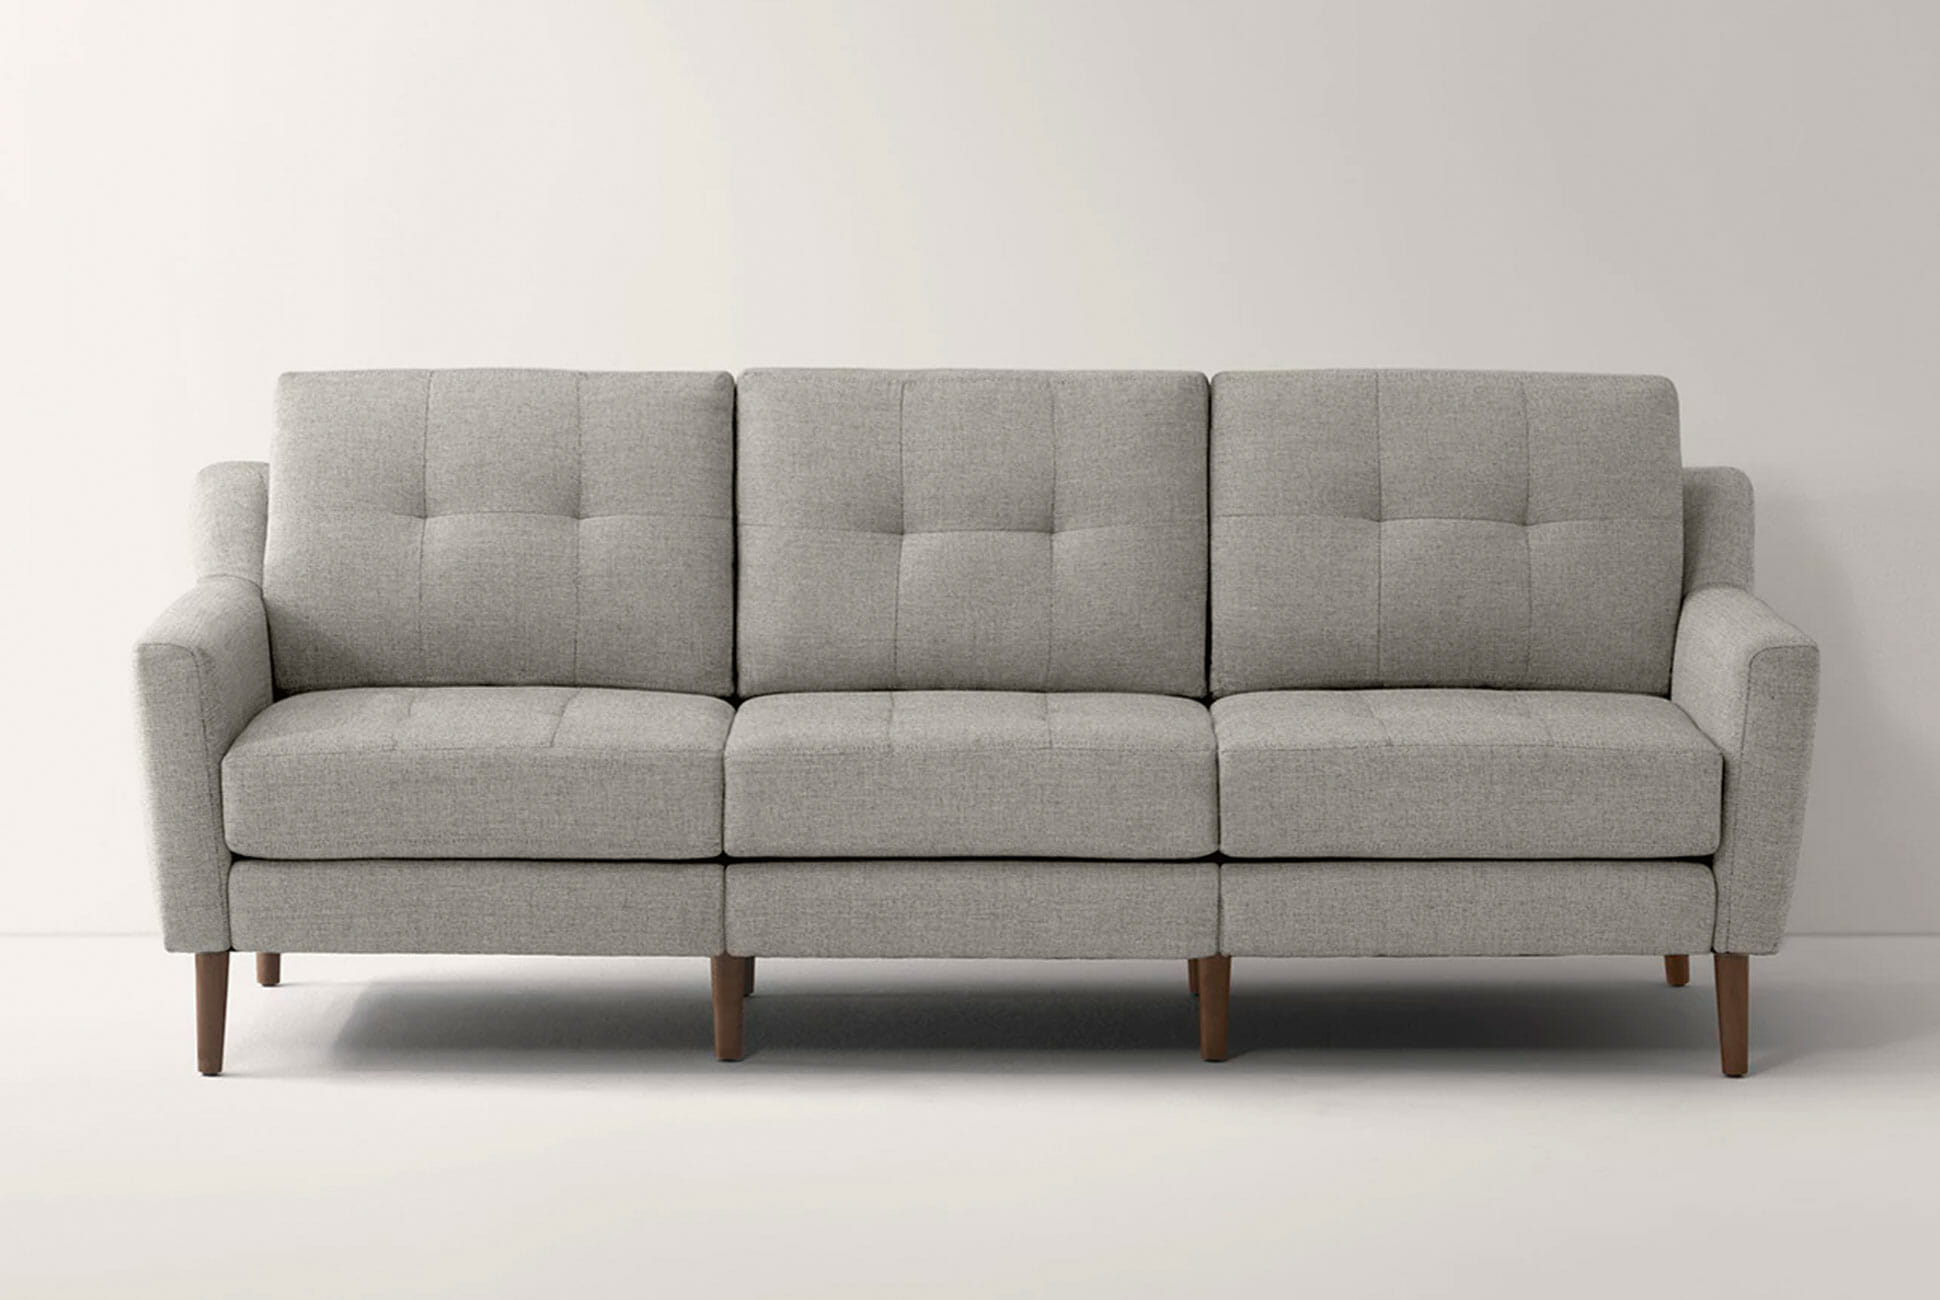 The 16 Best Sofas and Couches You Can Buy in 2019